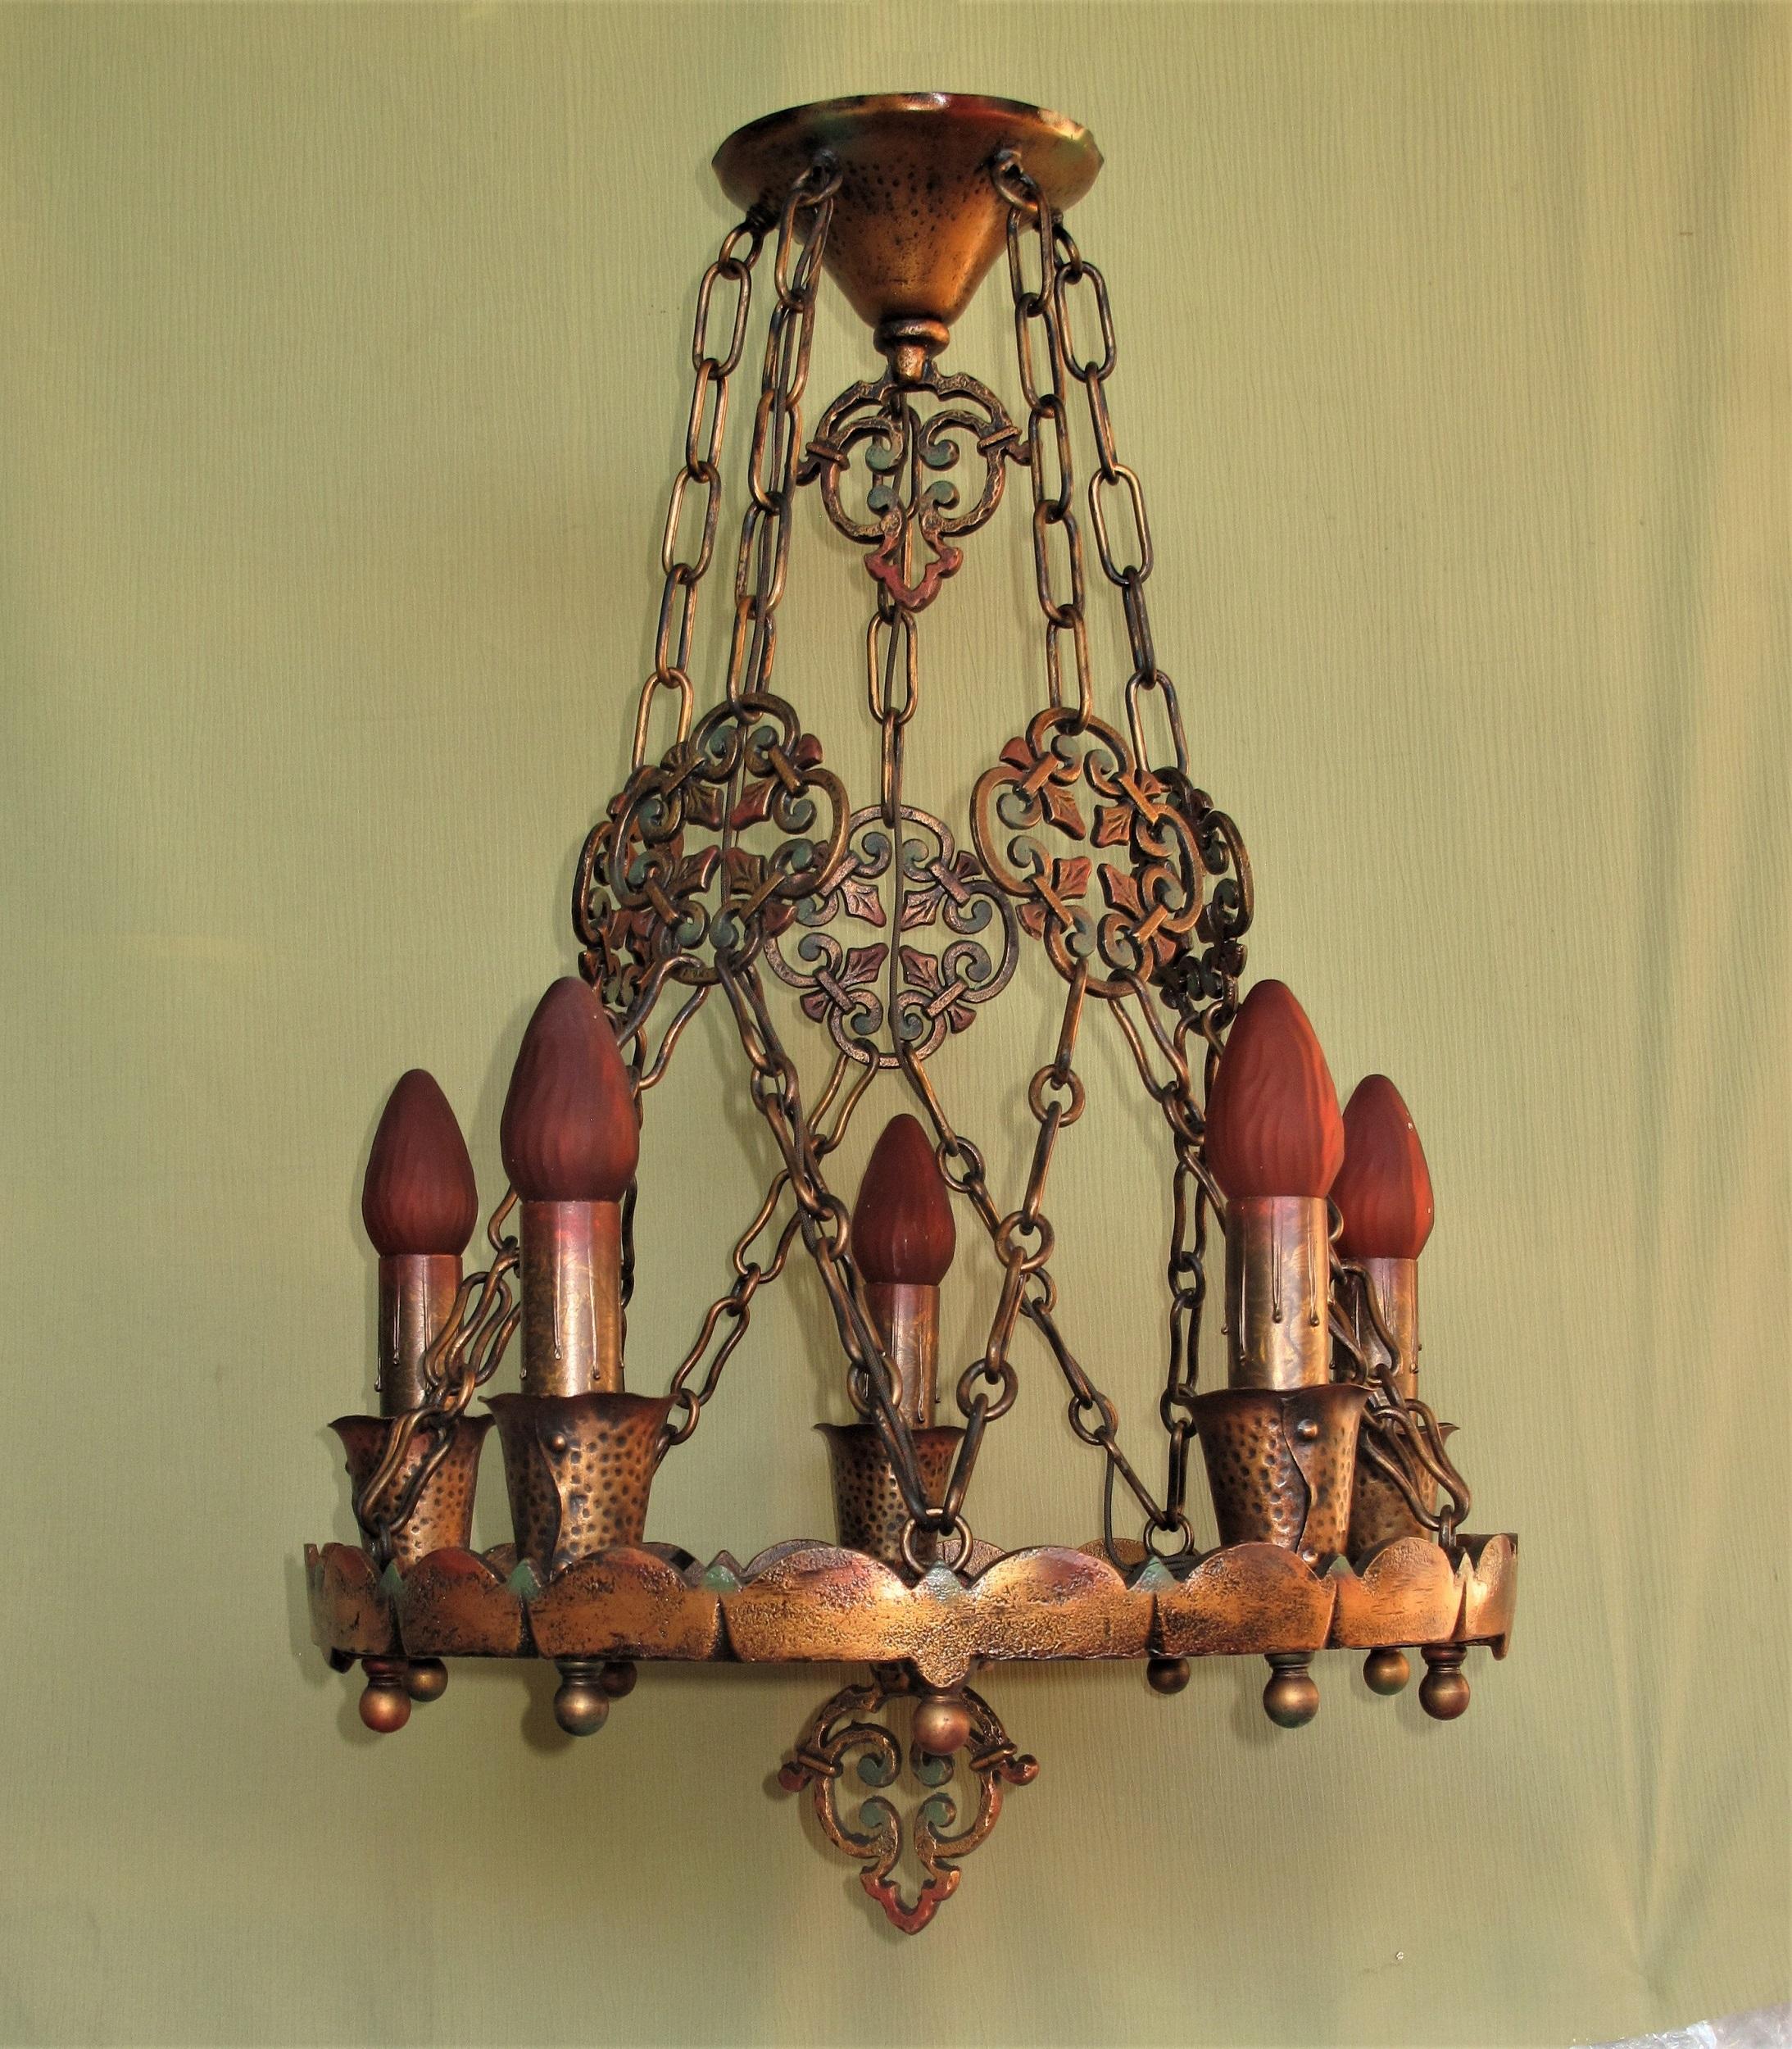 Priced for the set of single chandelier and four sconces.
Attributed to Feldman Co. Los Angeles, circa 1920.
Both chandelier and sconces are cast iron and have been refinished to match original colors. Refinishing included taking the fixtures down